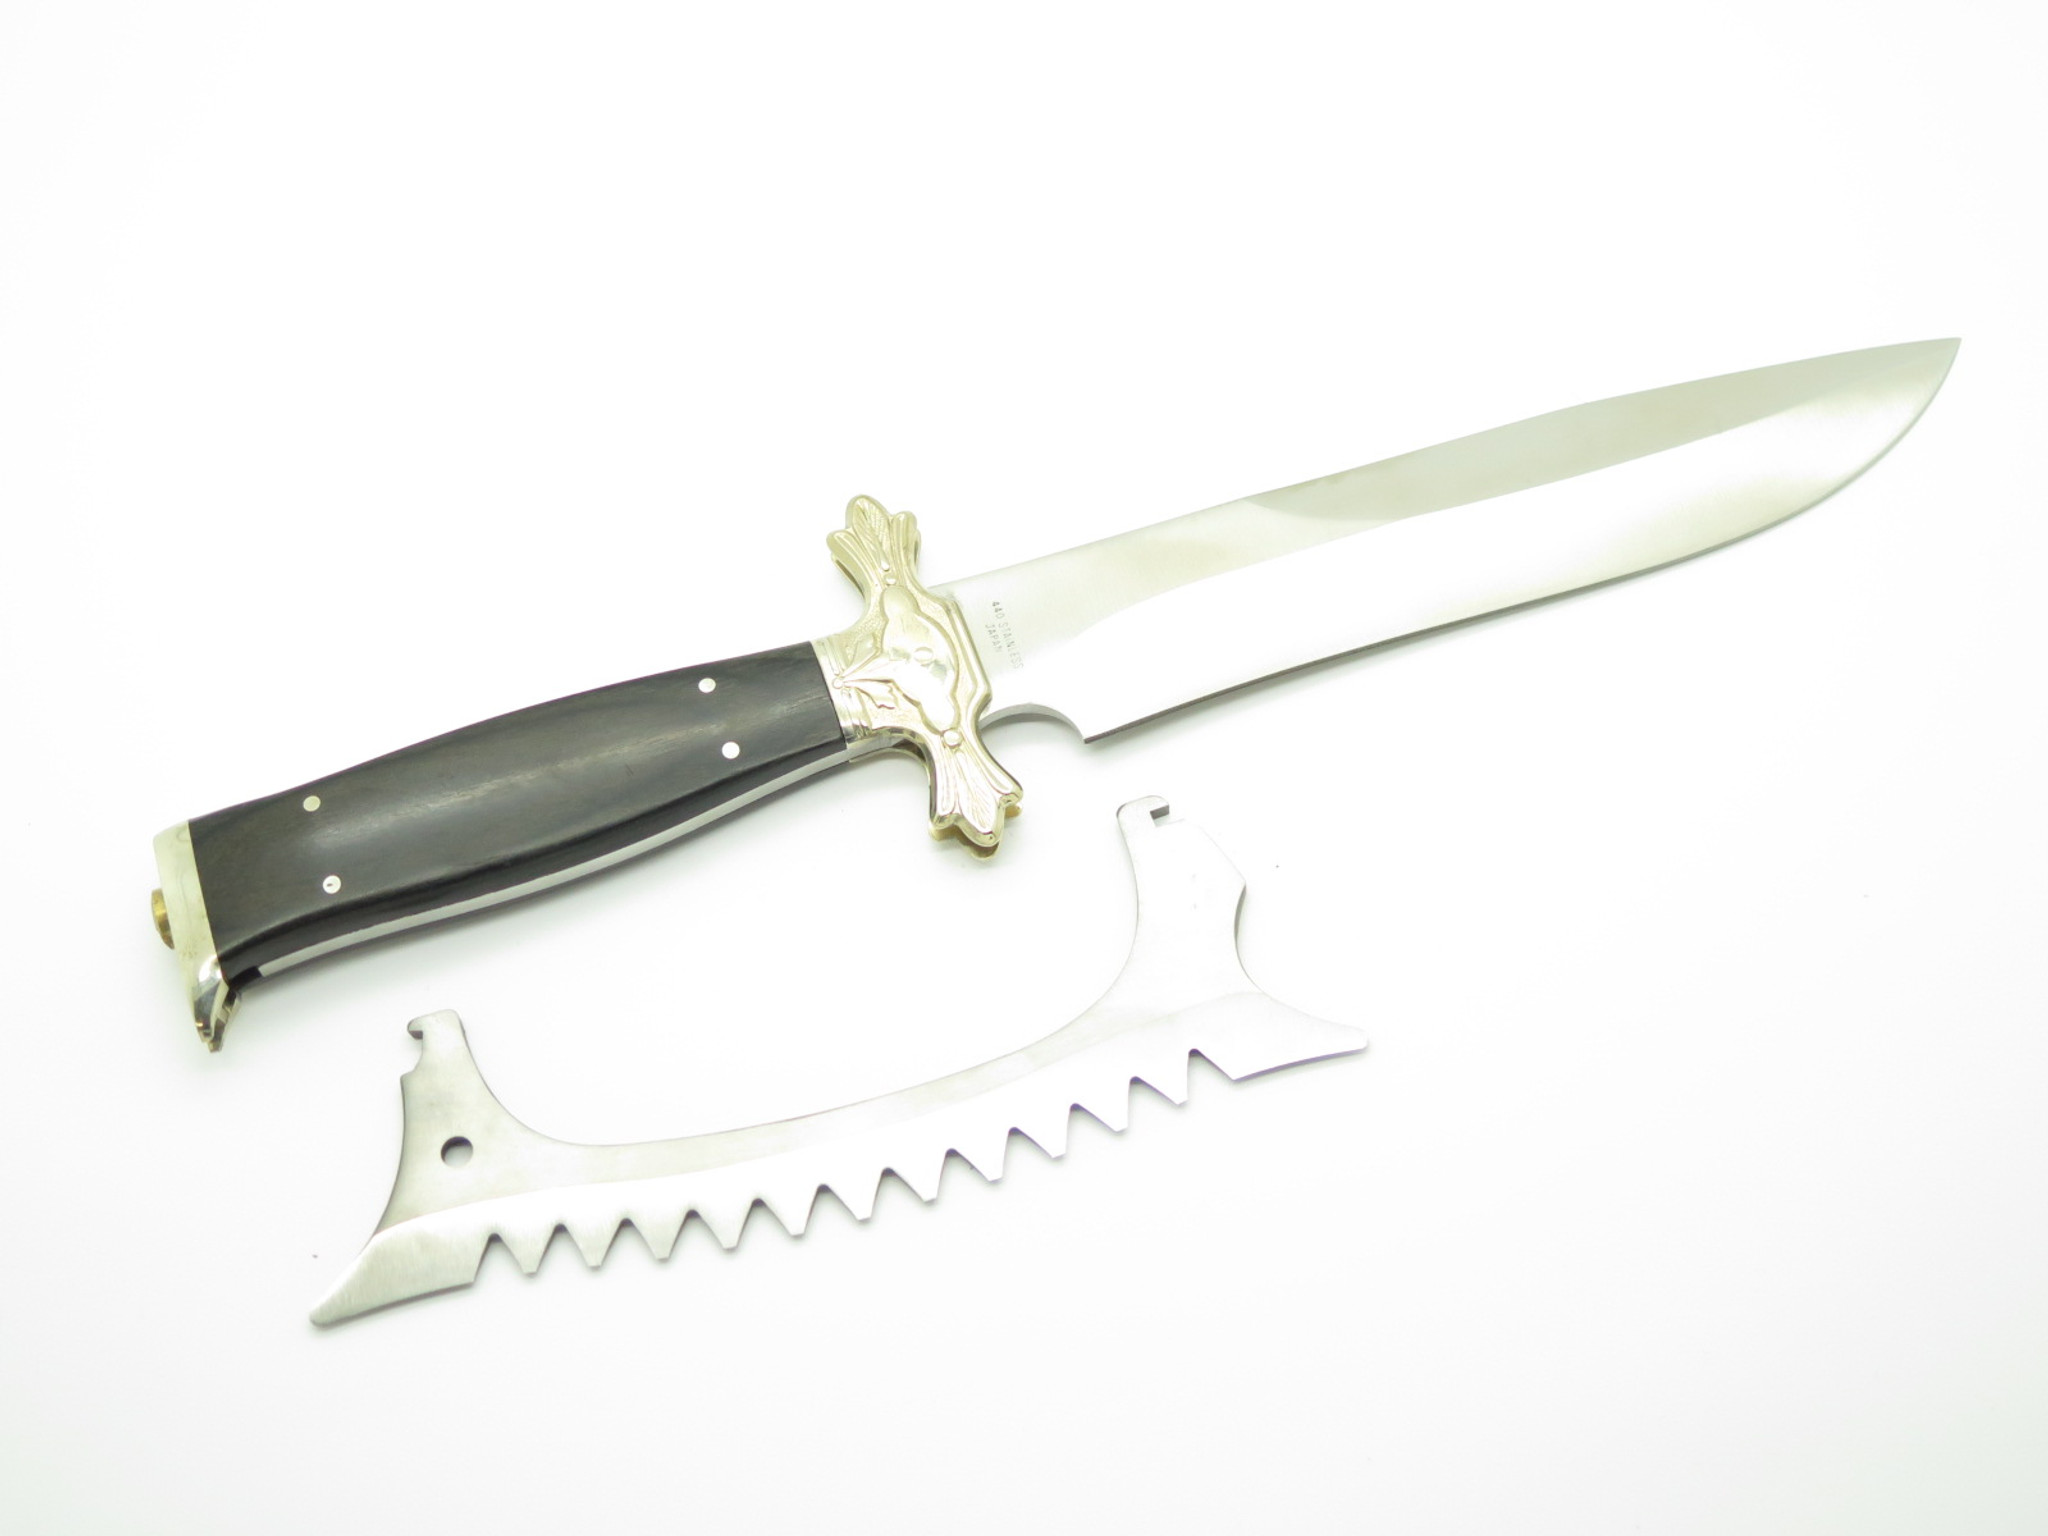 The Best Deals of the year! – Tokushu Knife